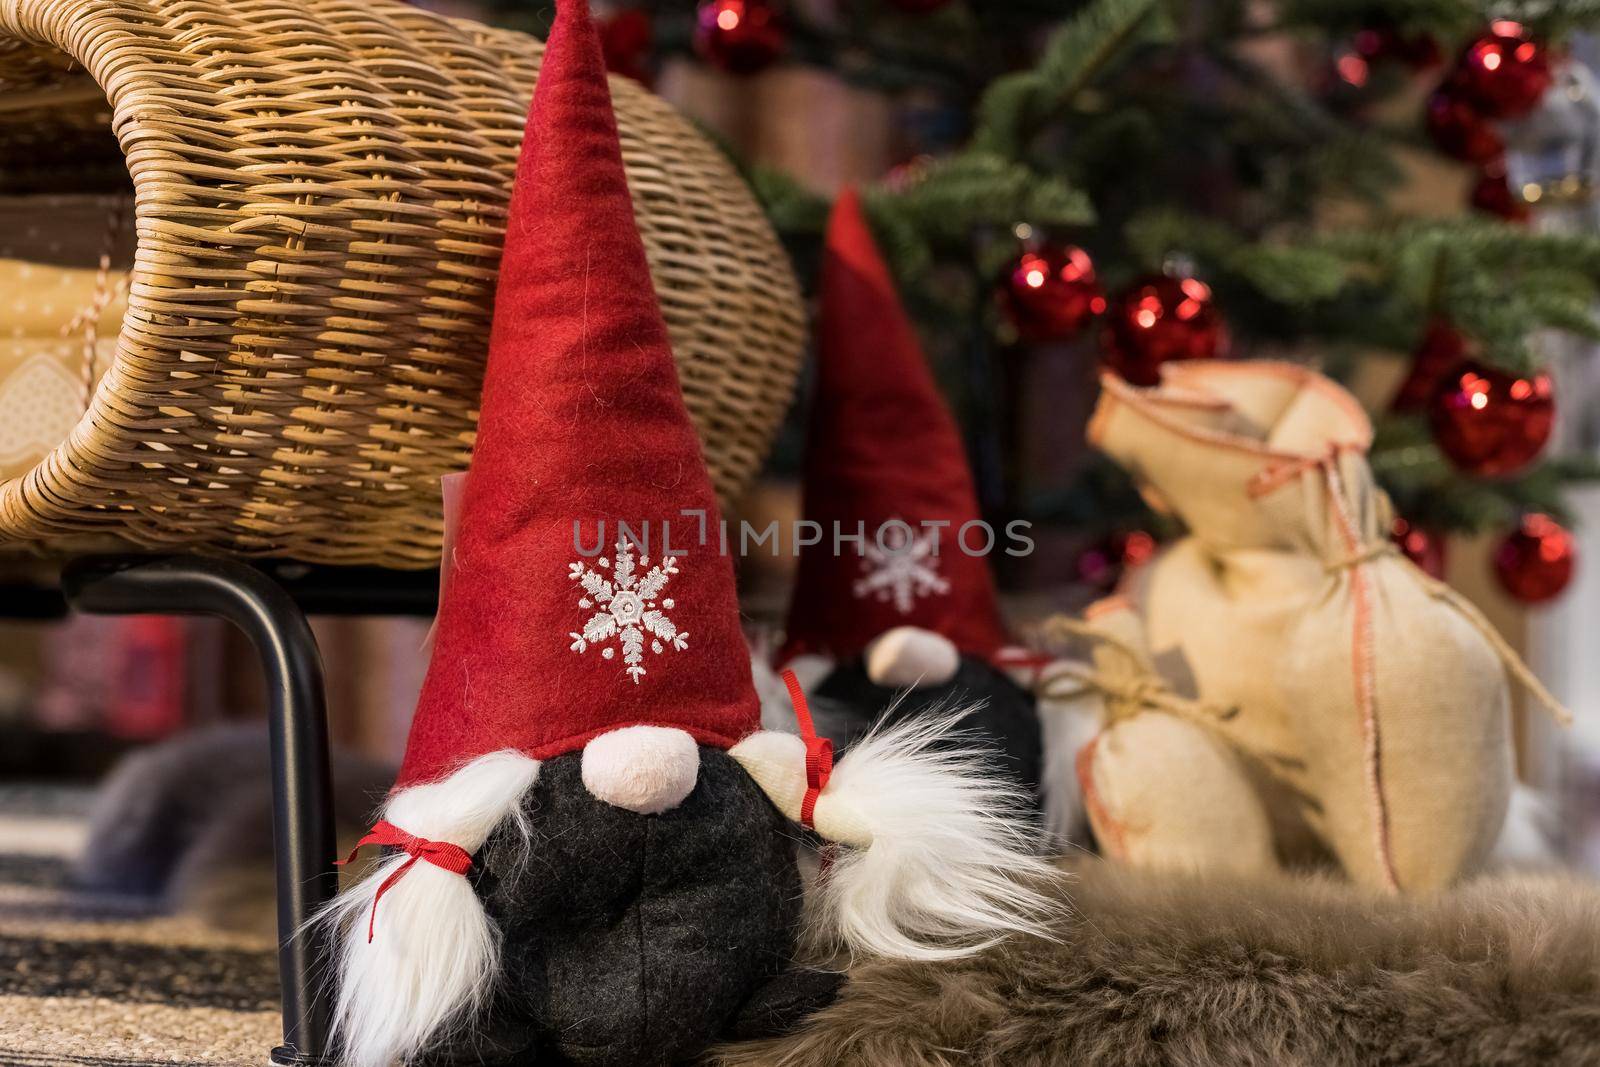 Ornamental arrangement for winter and Christmas, with a Santa puppet